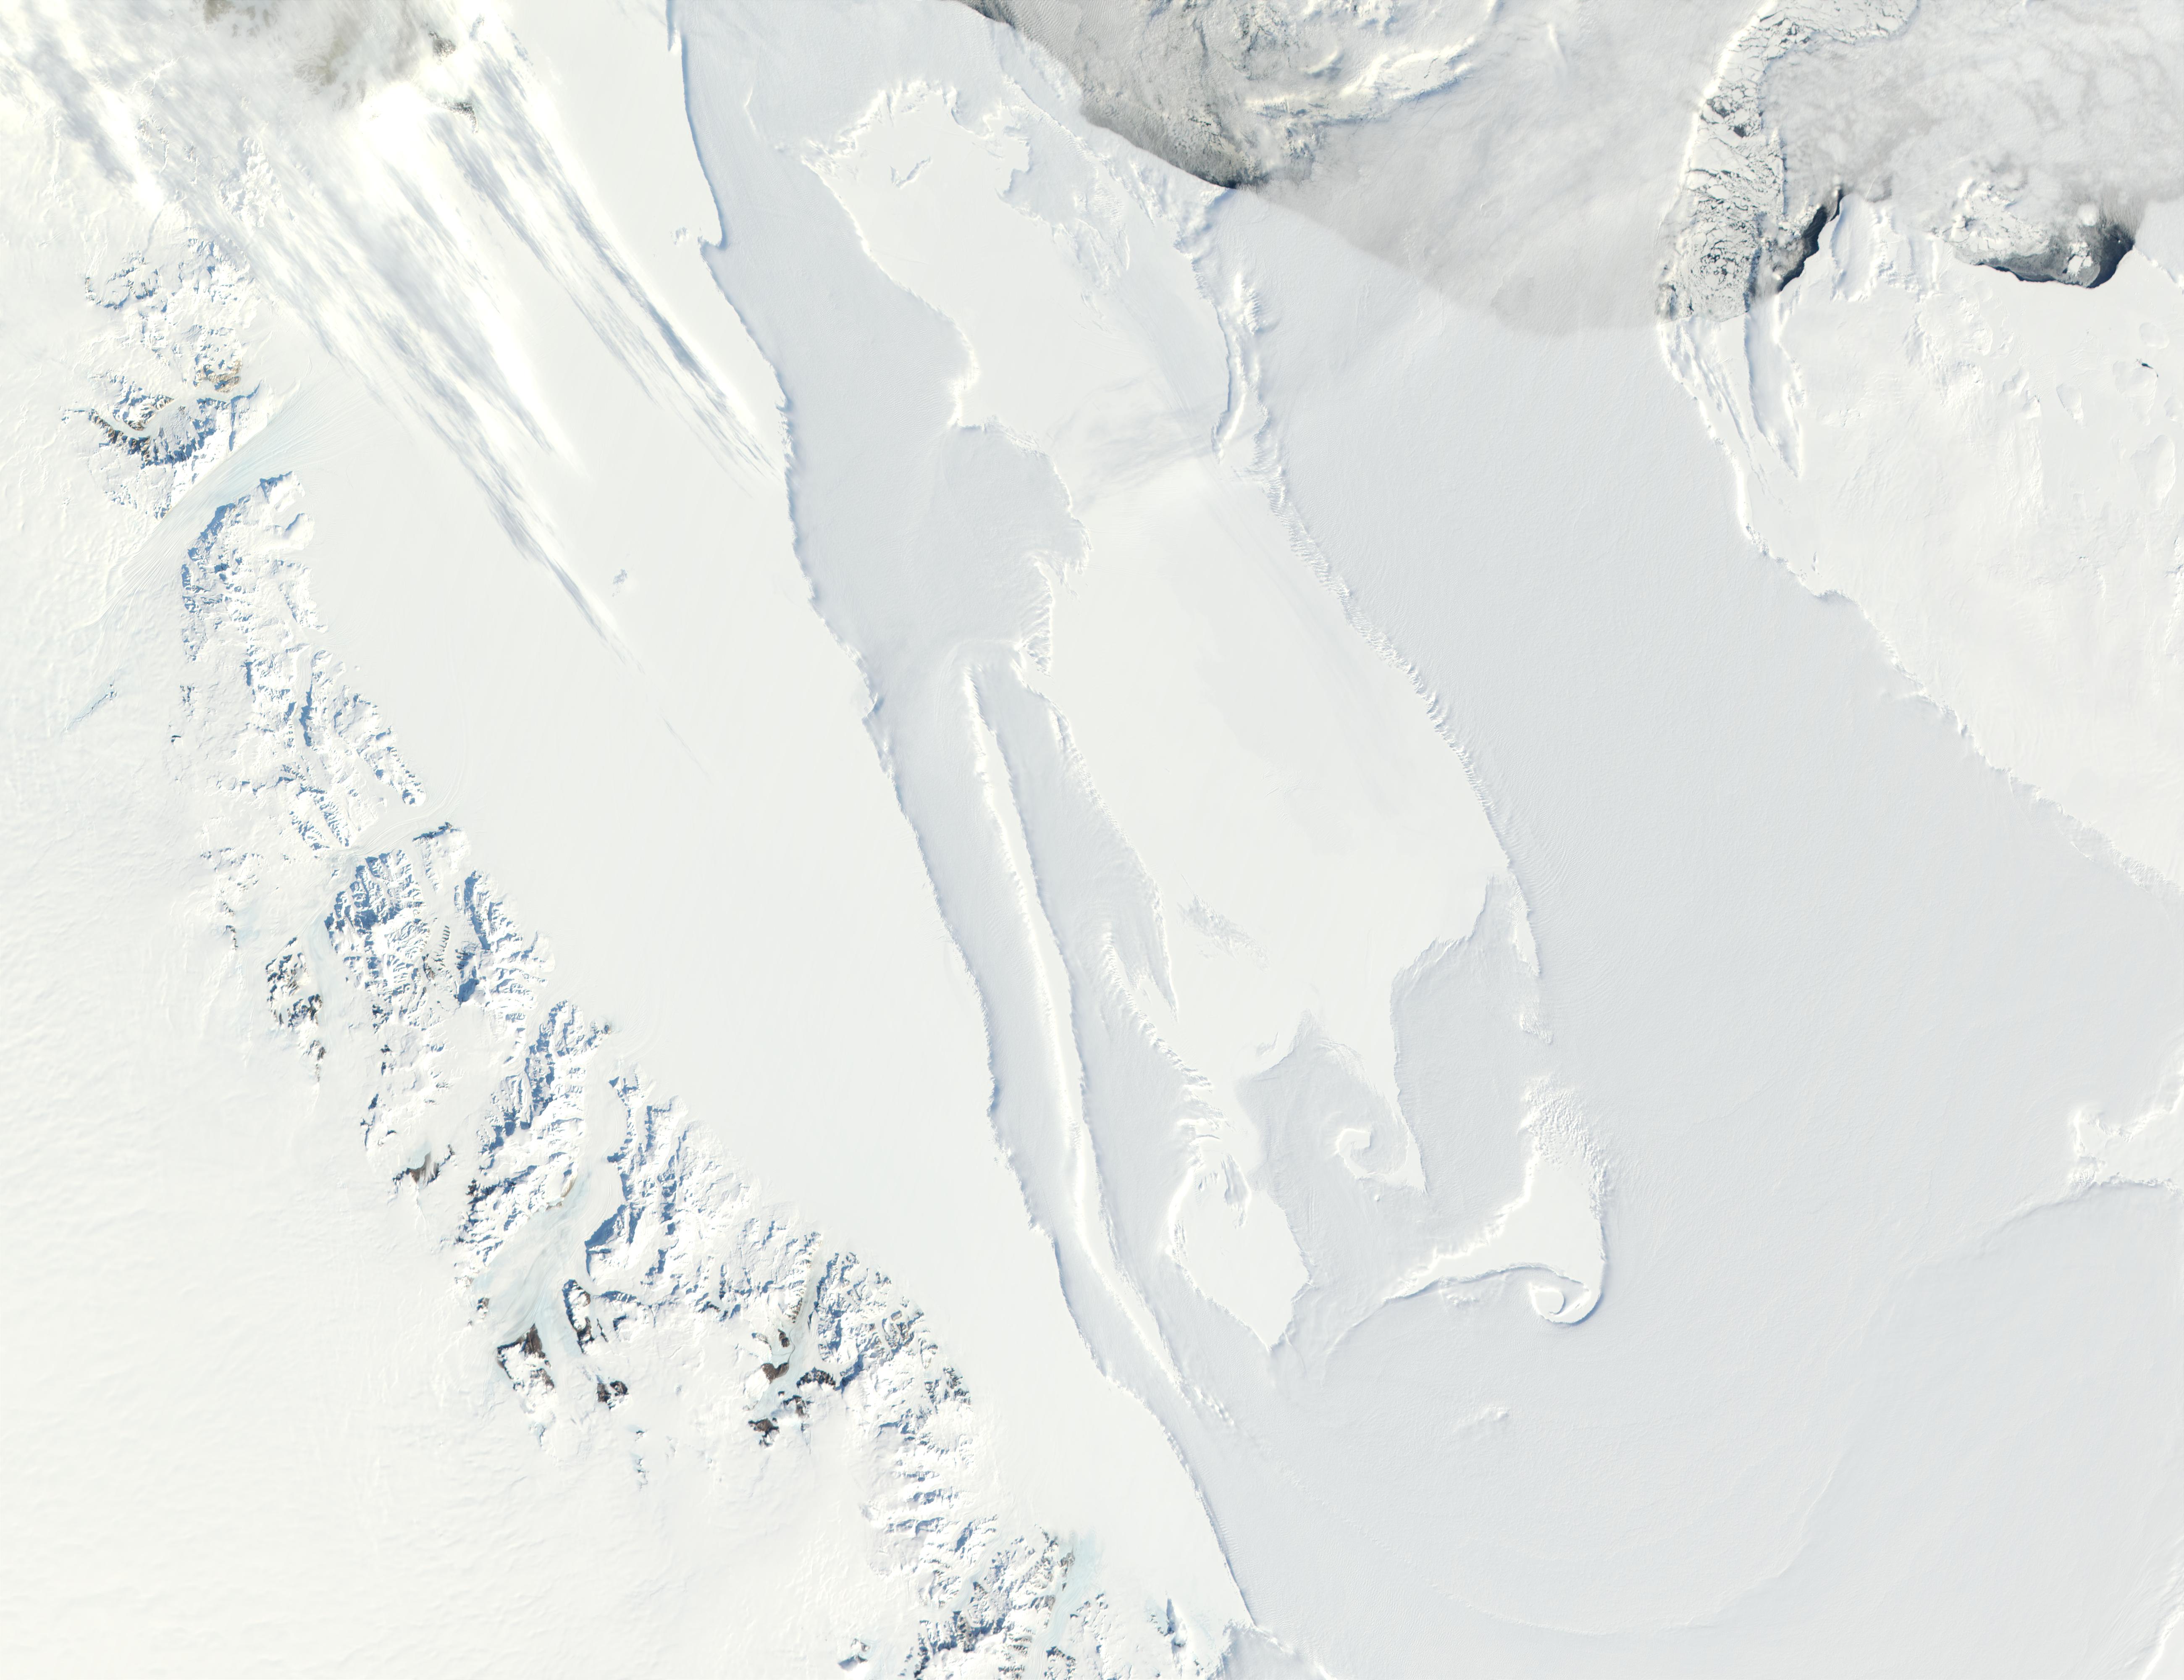 Transantarctic Mountains and Ross Ice Shelf, Antarctica - related image preview